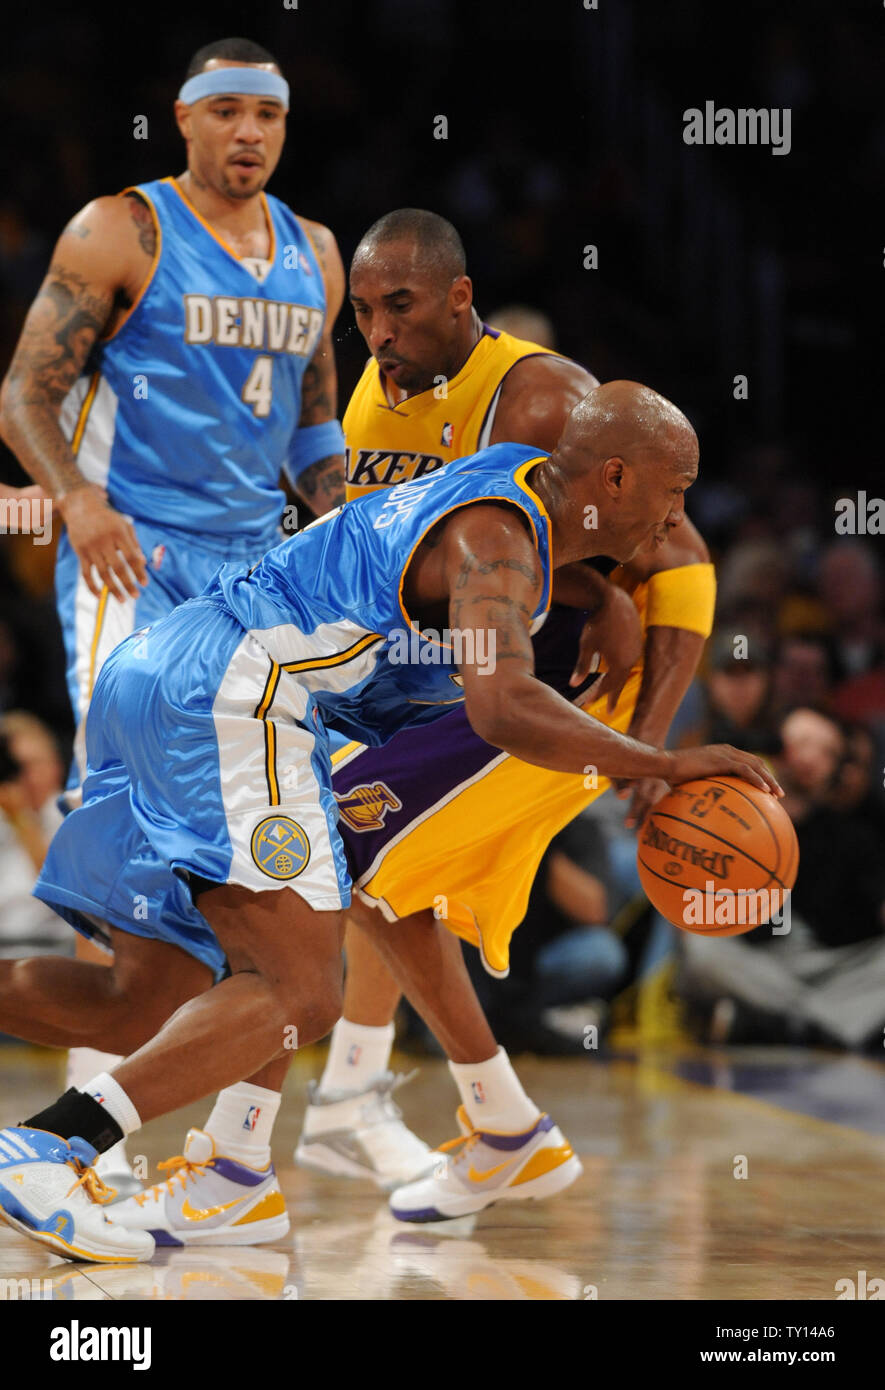 Denver Nuggets Chauncey Billups Drives Against Los Angeles Lakers Kobe Bryant In Game 1 Of The Los Angeles Lakers Vs Denver Nuggets Western Conference Finals At Staples Center In Los Angeles On